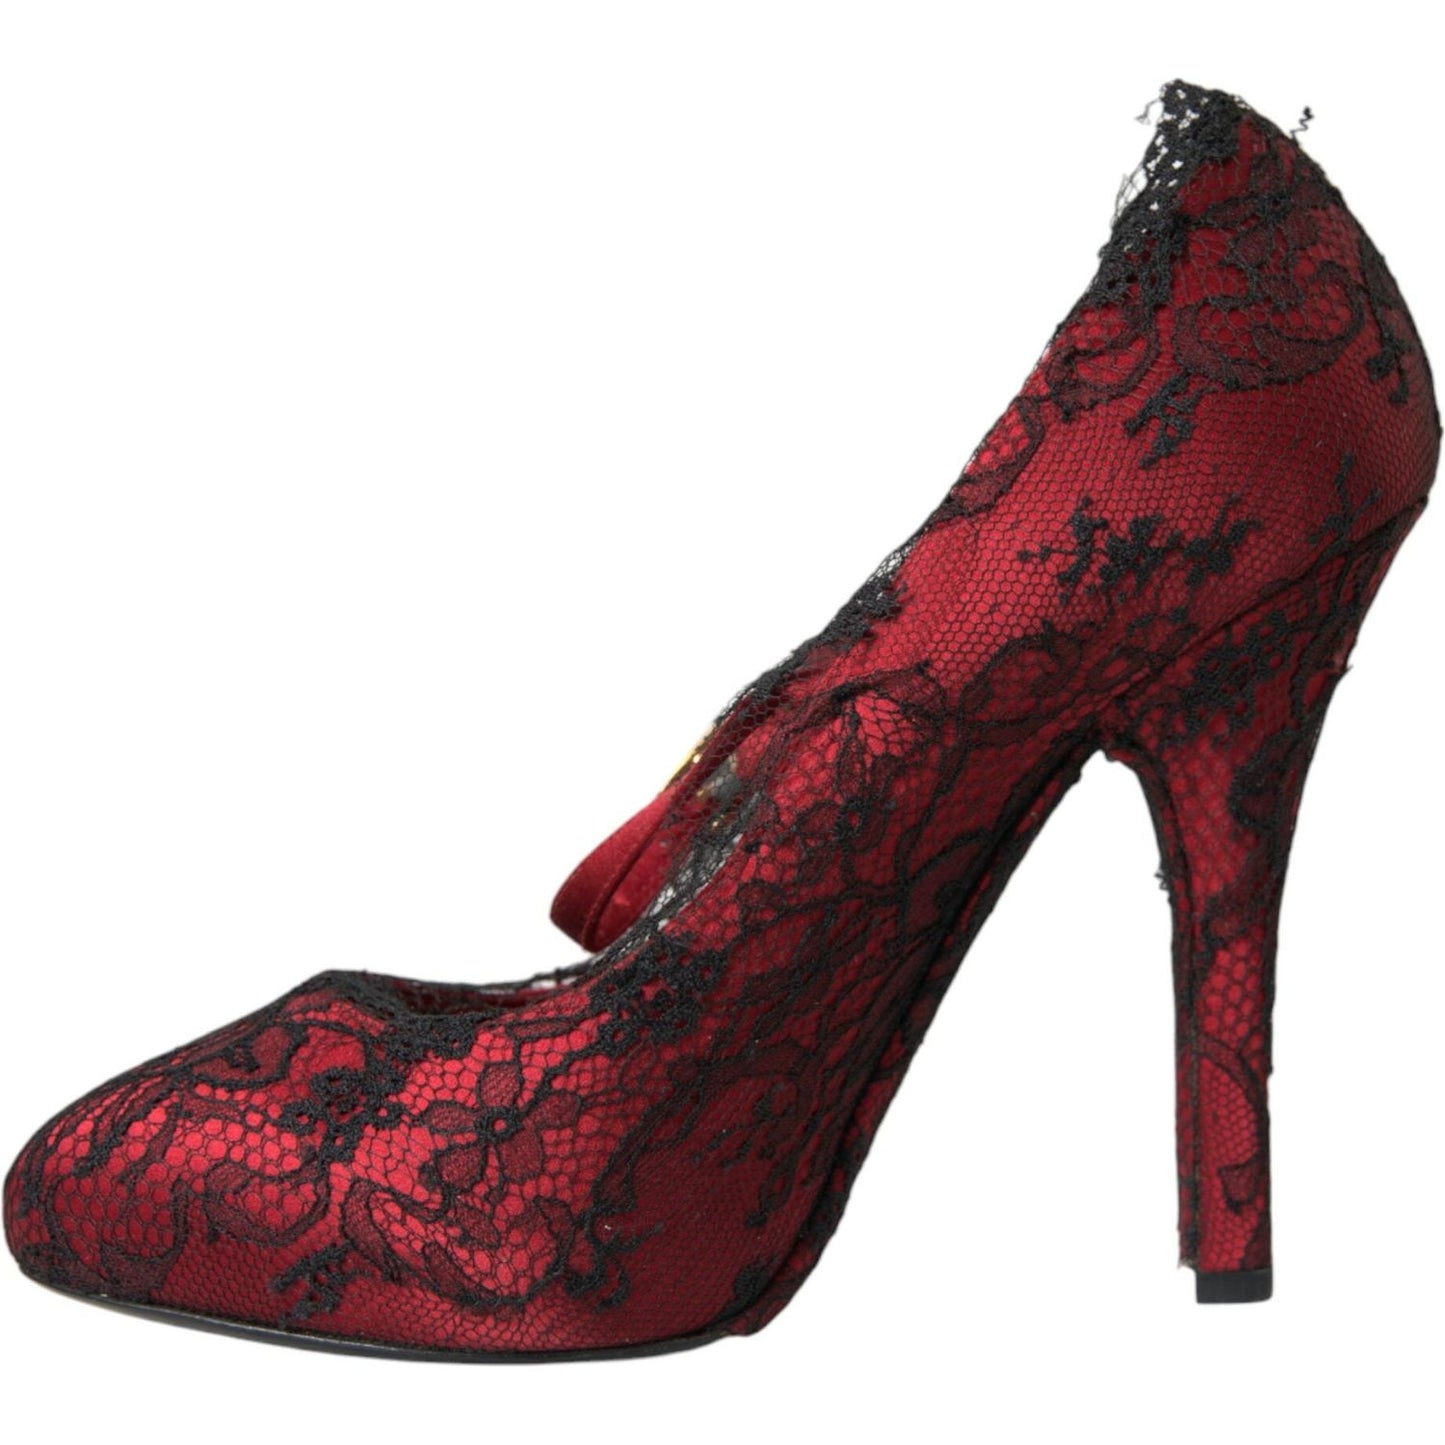 Dolce & Gabbana Red Black Floral Lace Mary Jane Pumps Shoes red-black-floral-lace-mary-jane-pumps-shoes